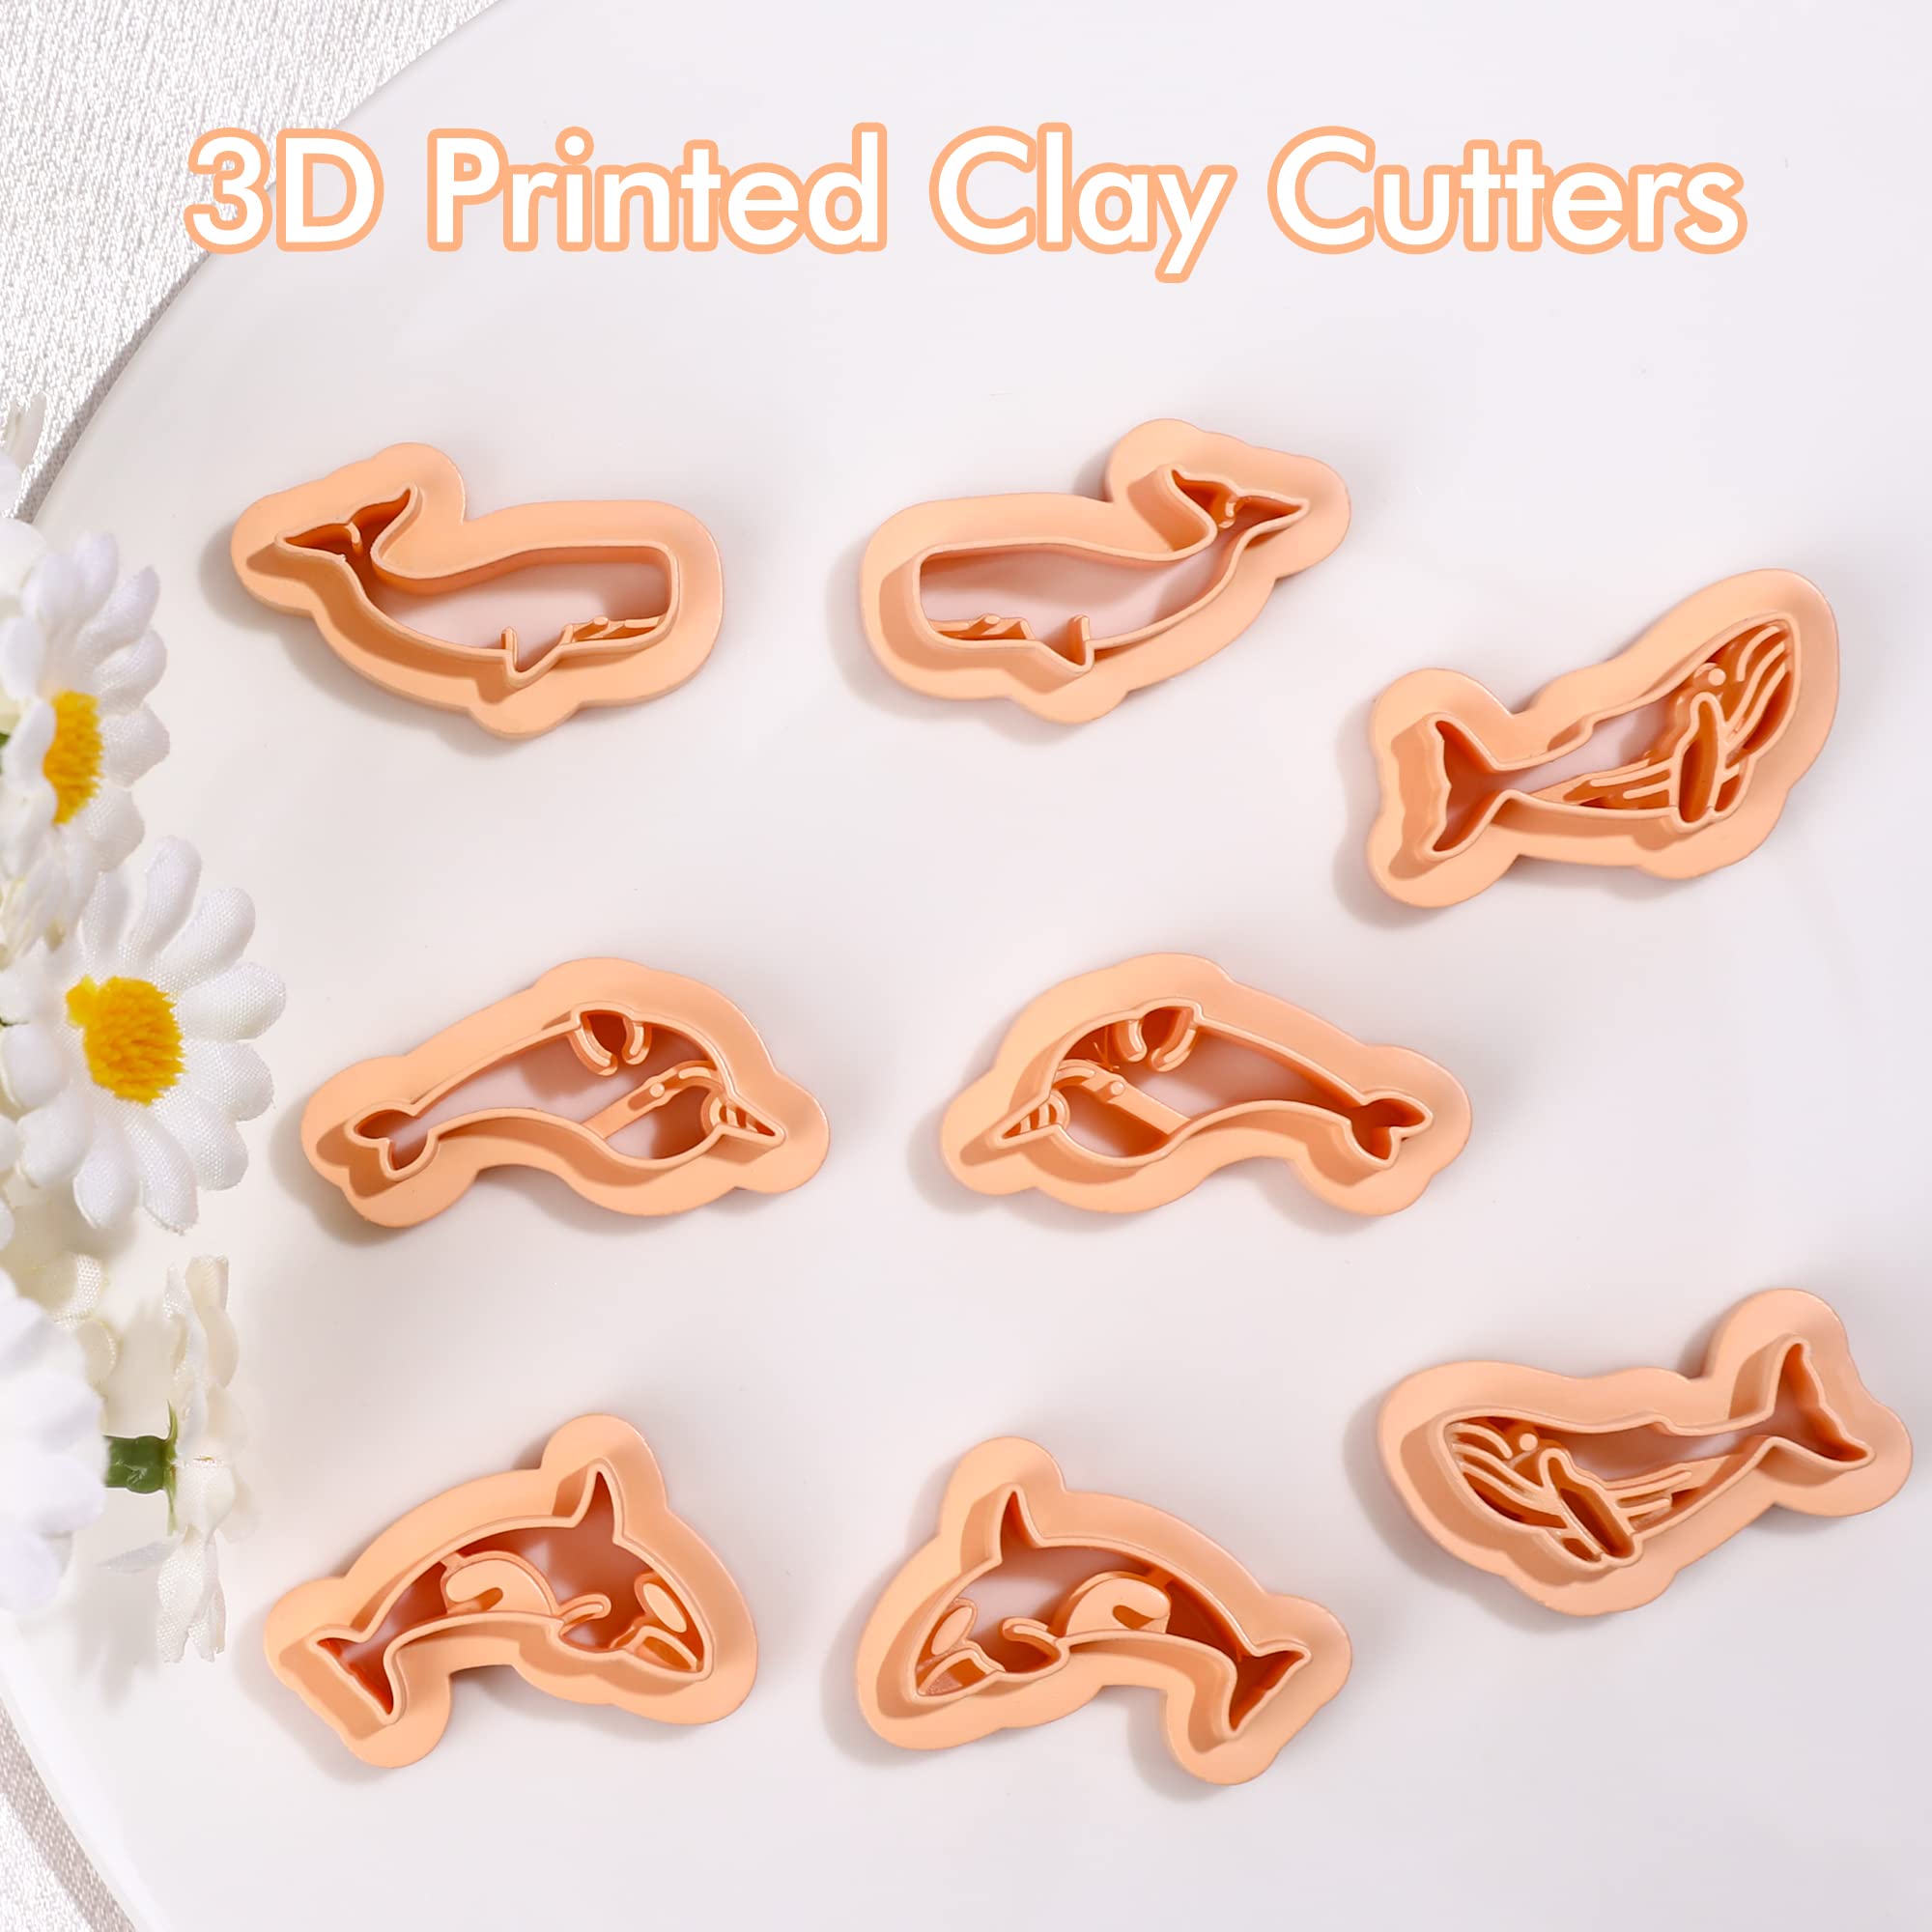  Puocaon Floral Clay Earring Cutters - 9 Shapes Clay Cutters for  Polymer Clay Jewelry Making, Bouquet Polymer Clay Cutters for Earrings,  Clay Stamps Arch Clay Cutters Earrings Making Set